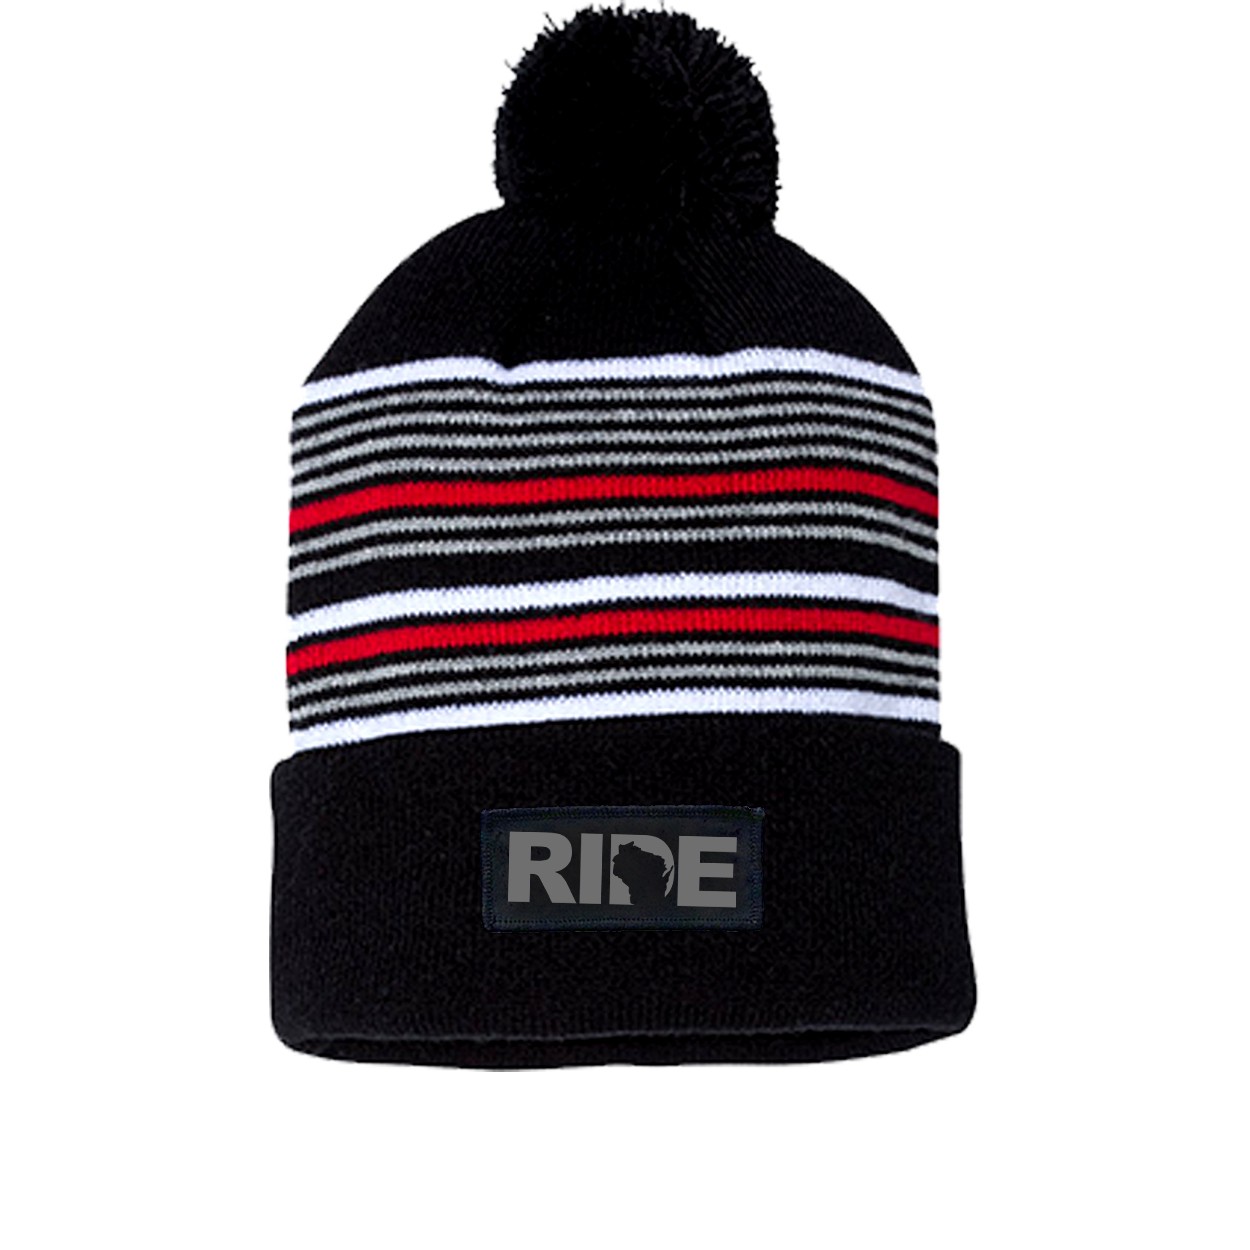 Ride Wisconsin Night Out Woven Patch Roll Up Pom Knit Beanie Black/ White/ Grey/ Red Beanie (Gray Logo)